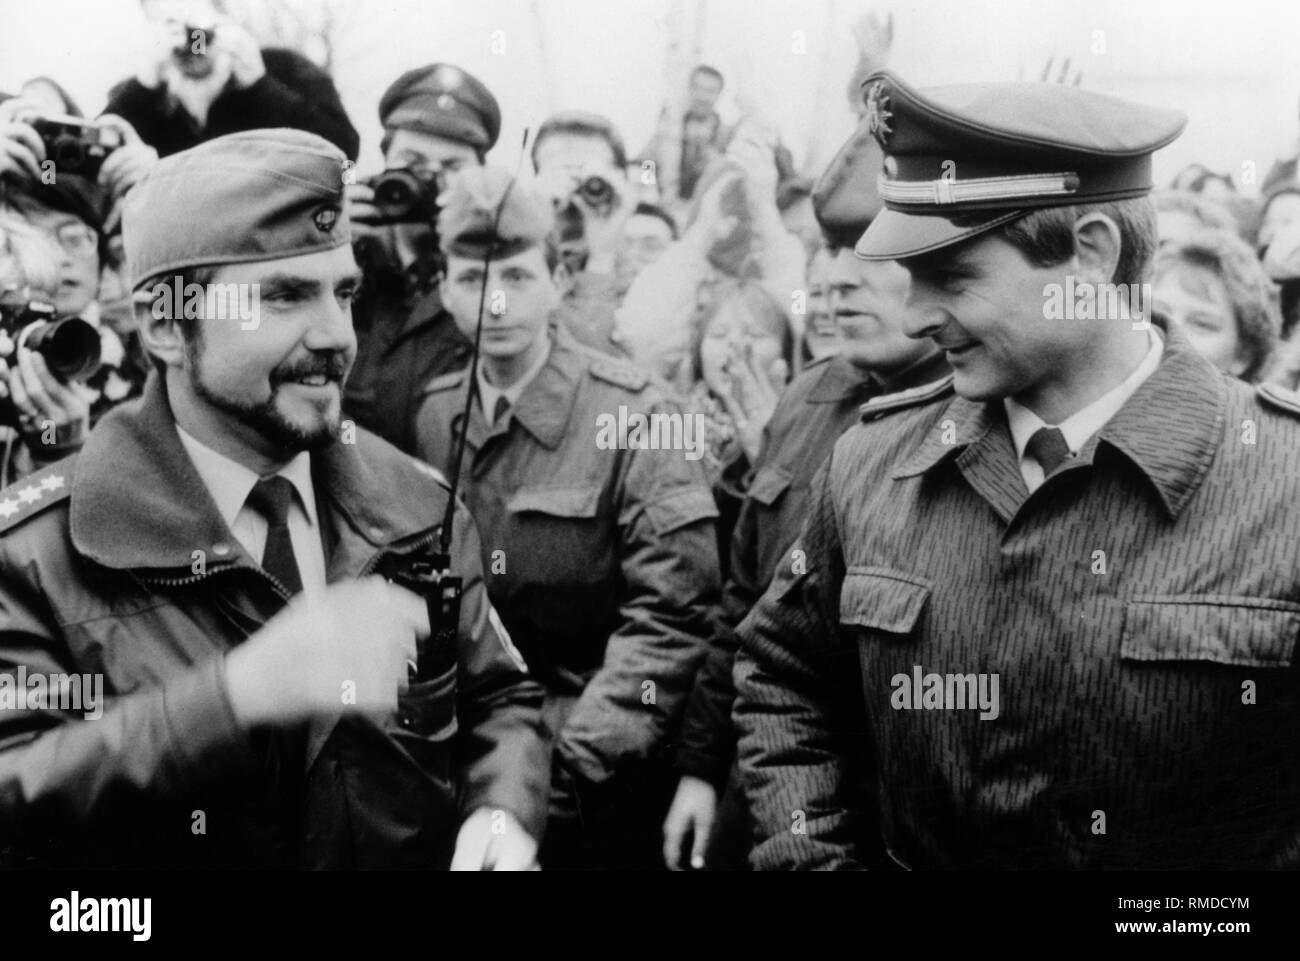 Berlin policemen together with GDR border guards after the fall of the Berlin Wall.  They changed hats and smile. In the background are photographers. Stock Photo